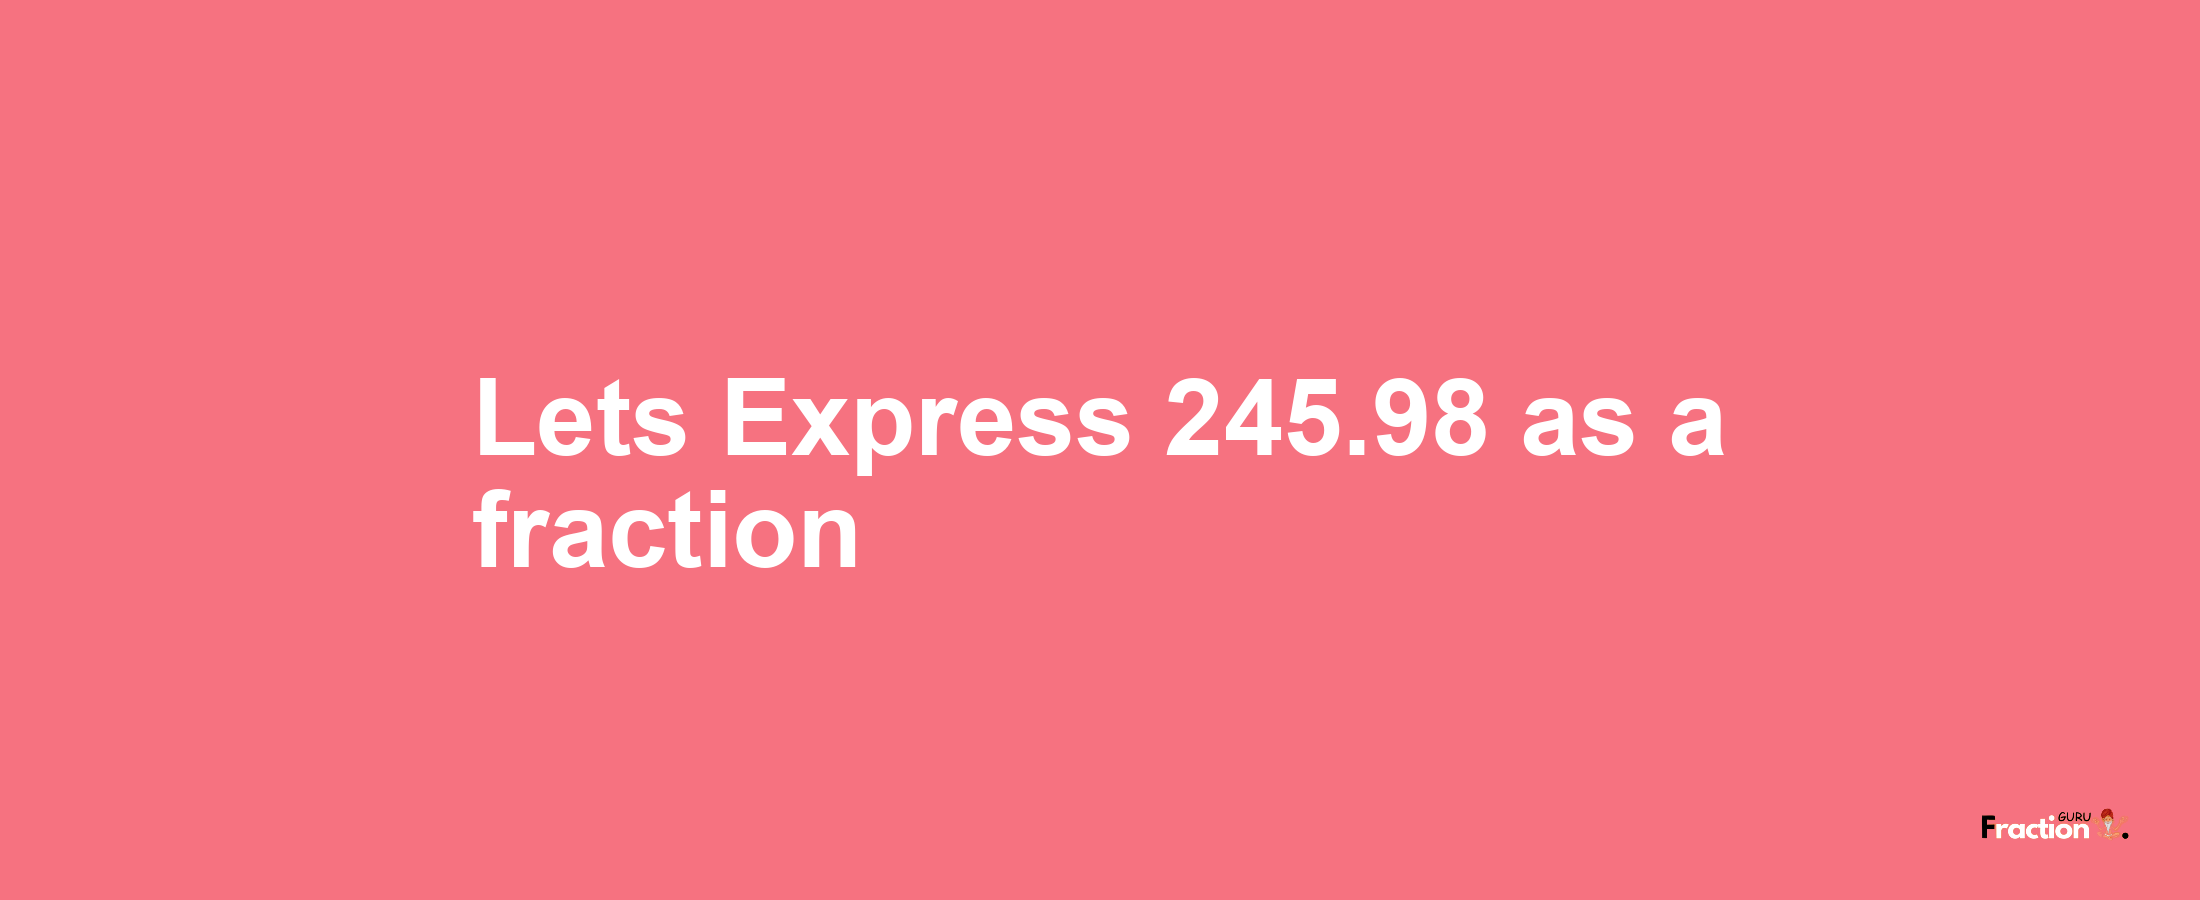 Lets Express 245.98 as afraction